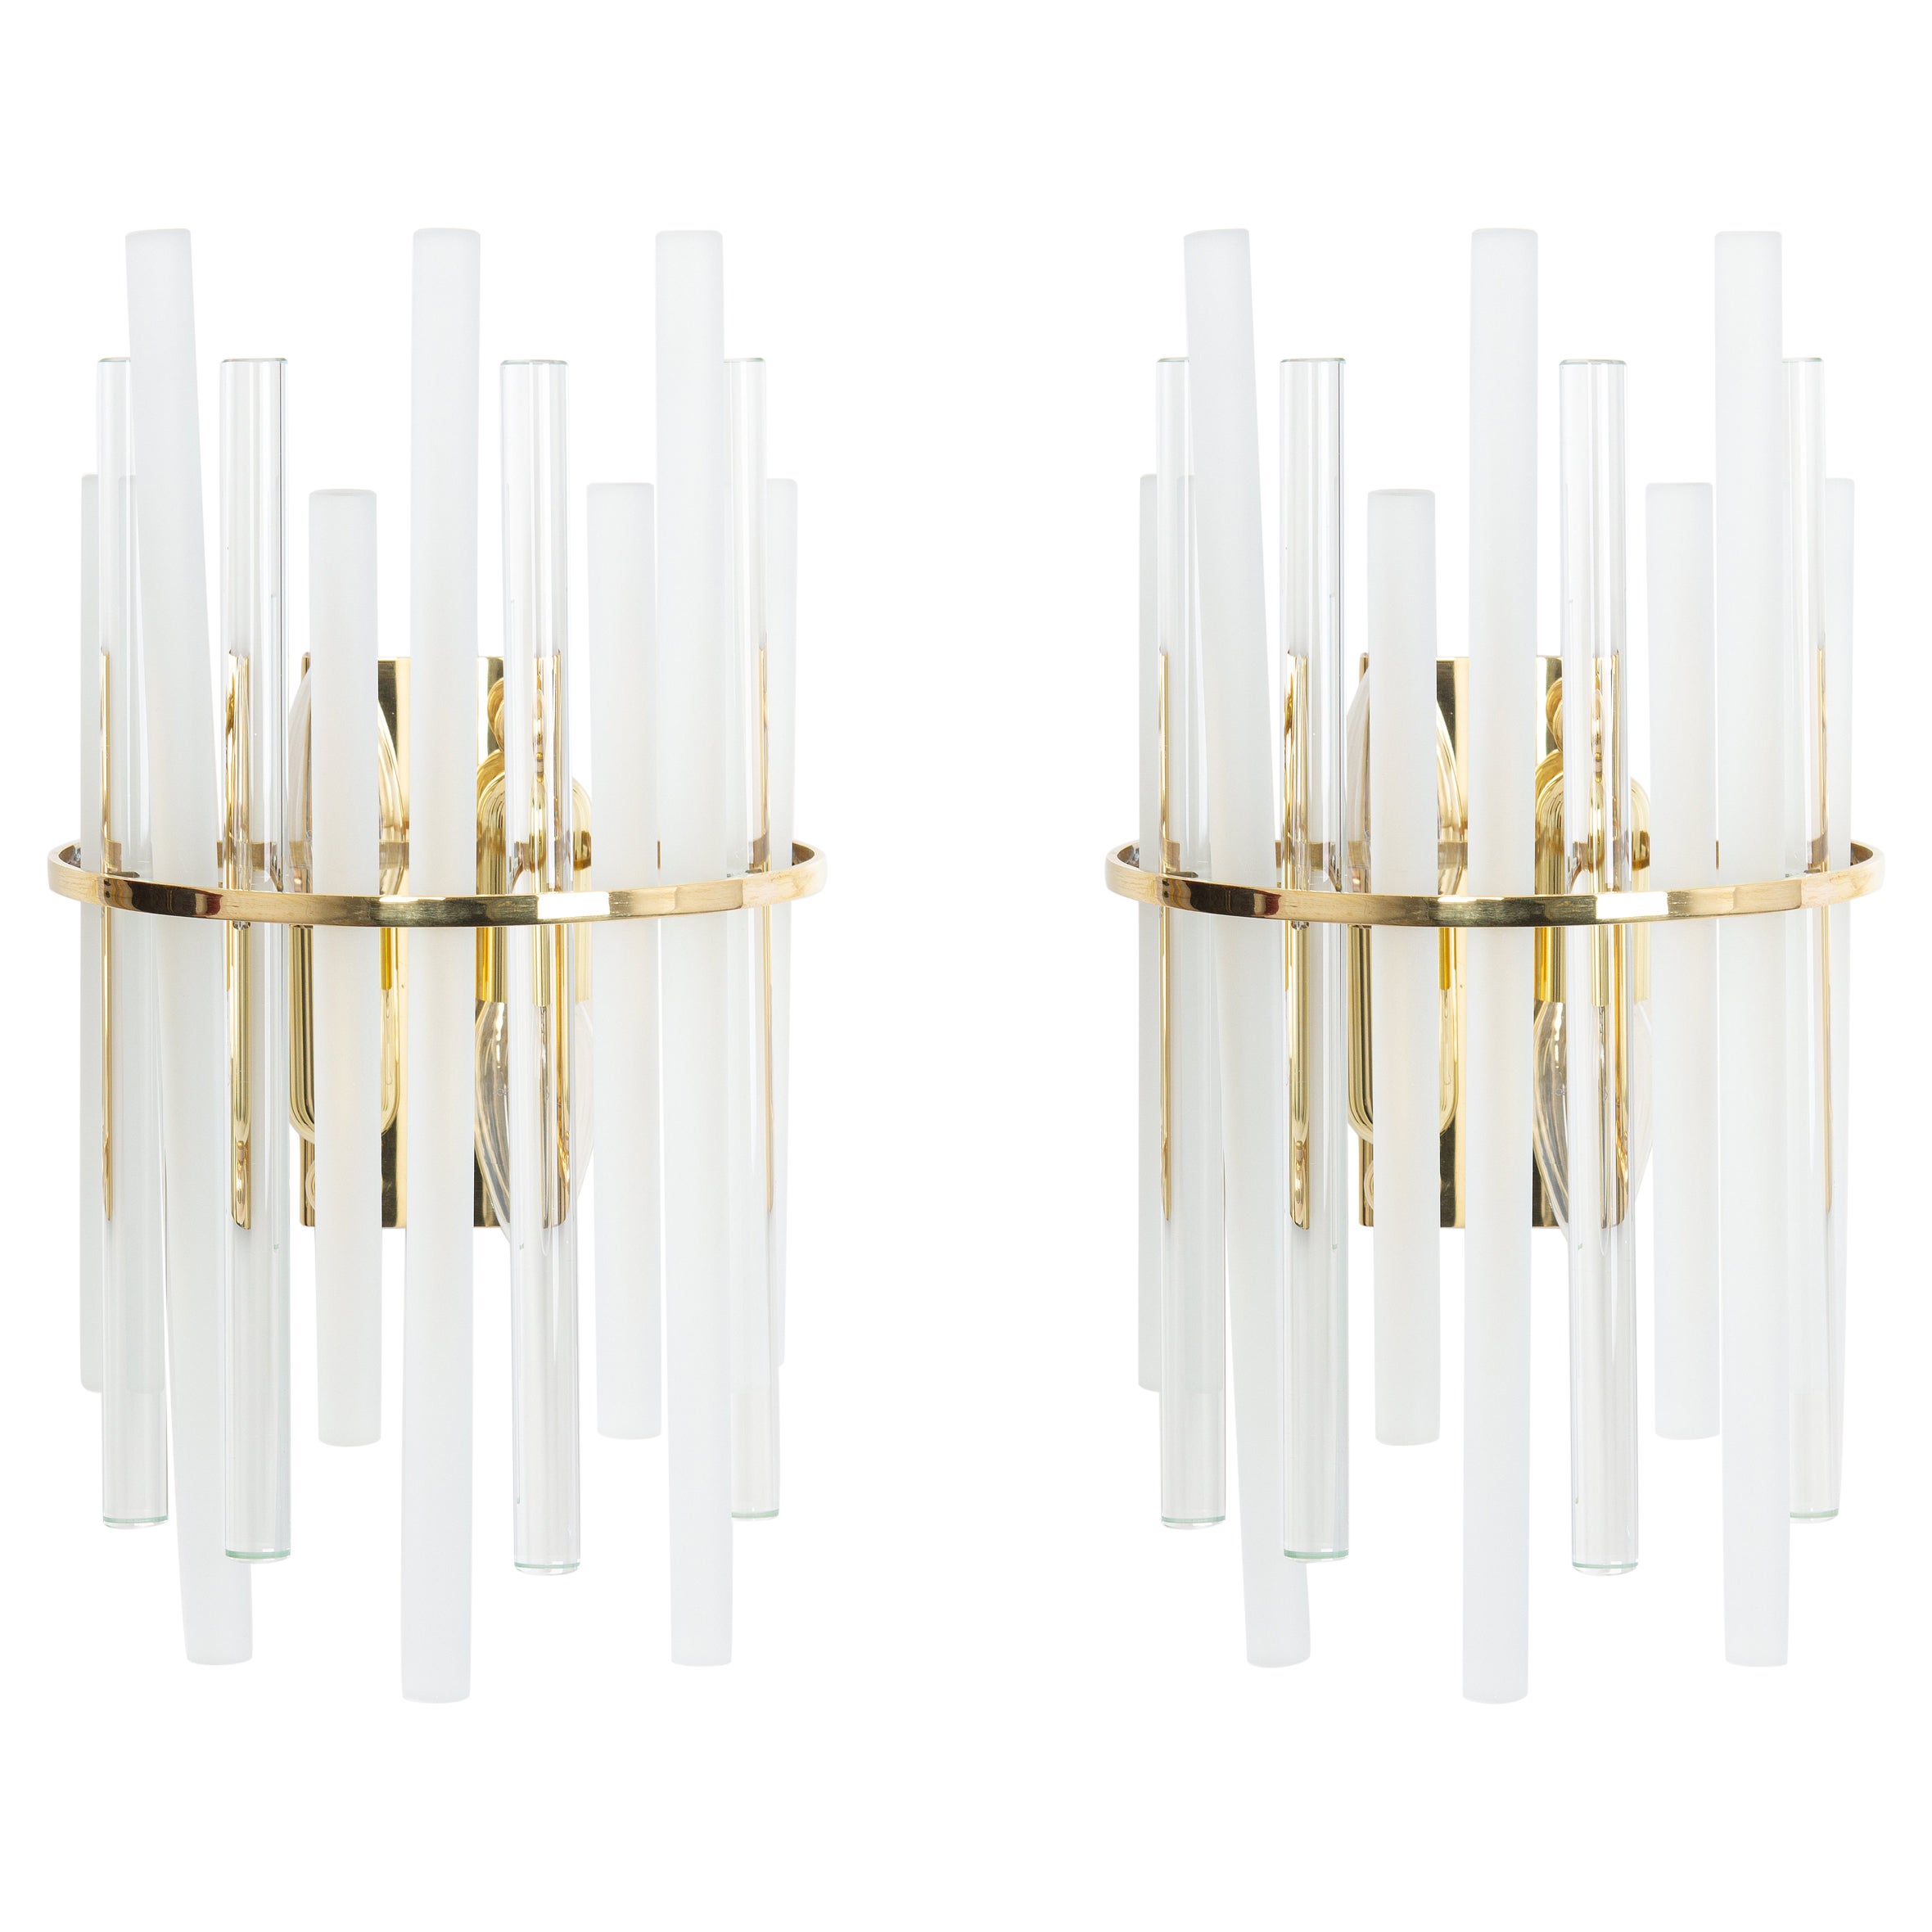 Wonderful pair of midcentury brass wall sconces with crystal glasses, made by Christoph Palme, Germany, manufactured, circa 1970-1979.
Dimensions:
Width 7.8 in., 20 cm
Height 13.7 in., 35 cm
Depth 5.9 in., 15 cm

Each sconce needs 2 x E14